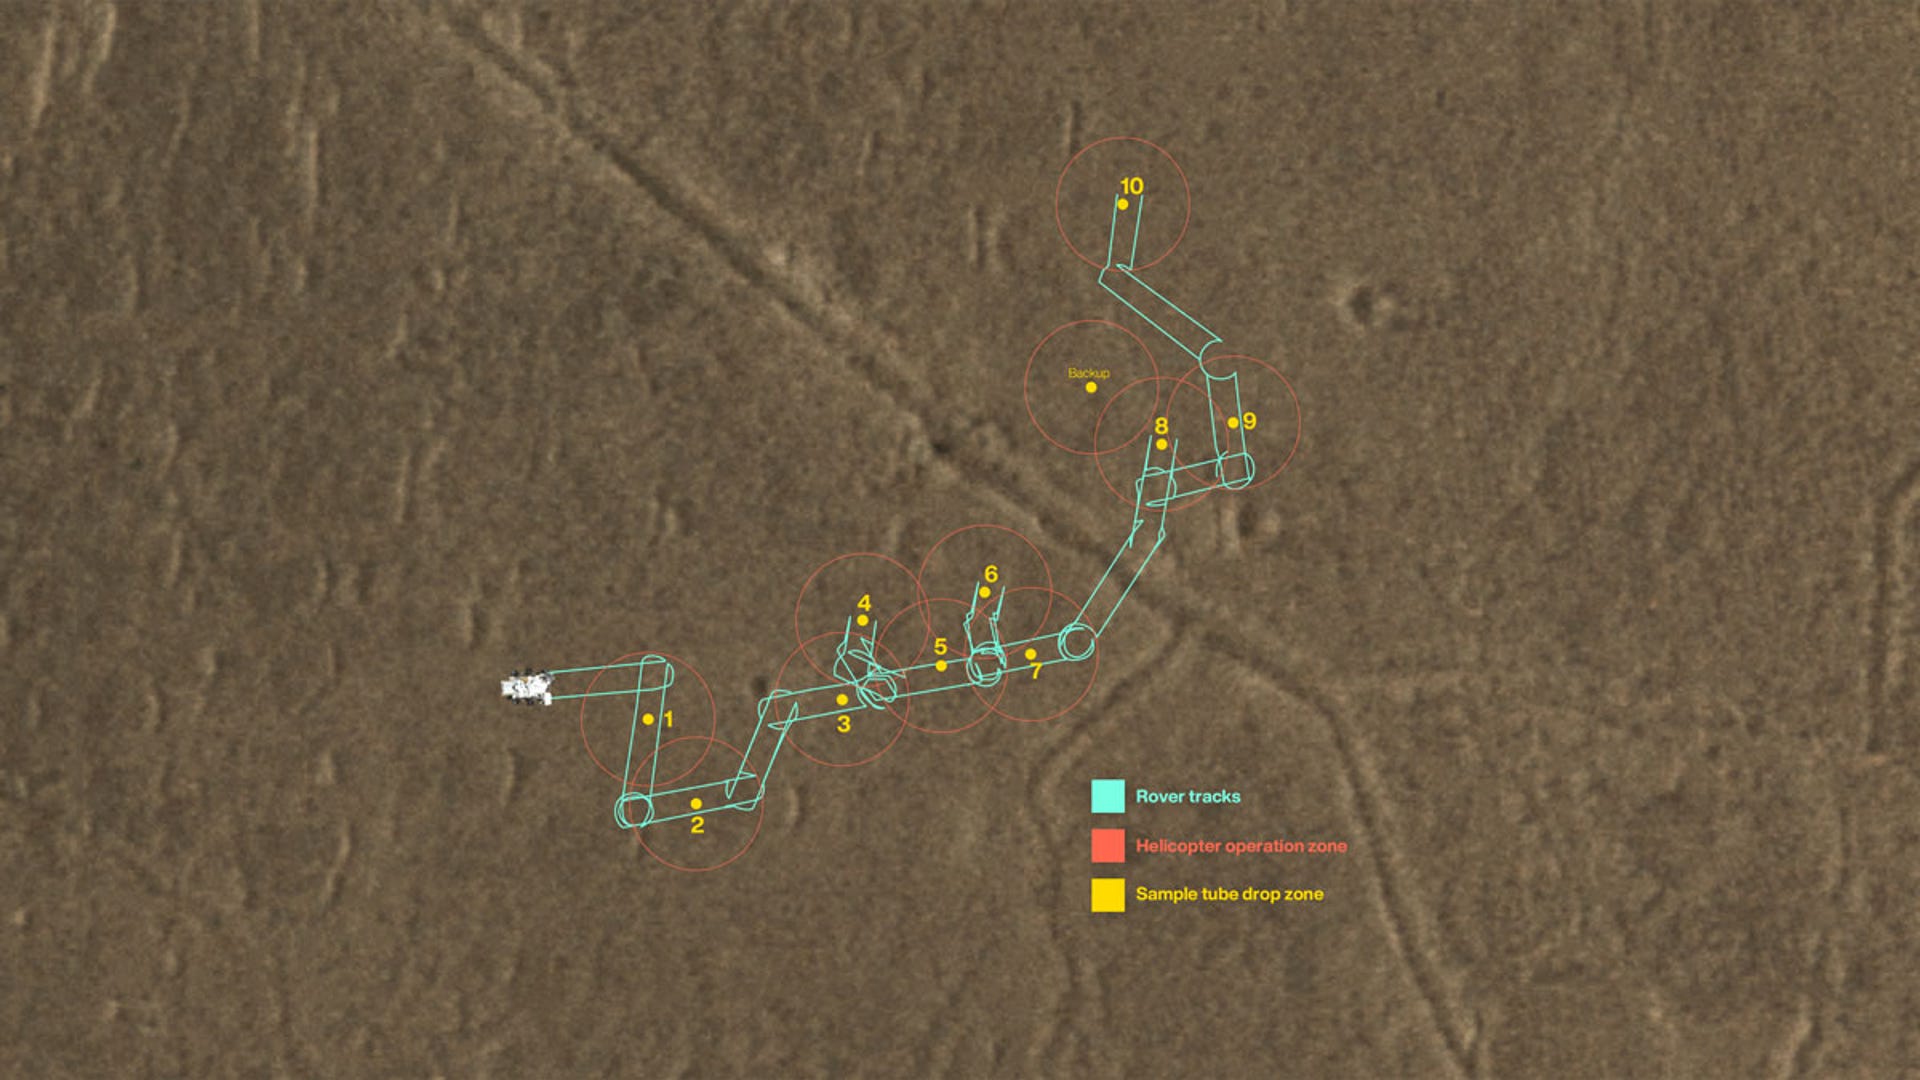 Top-down look at Three Forks sample depot site on Mars the locations of tube drops in yellow, rover tracks in blue and helicopter zones as red circles.